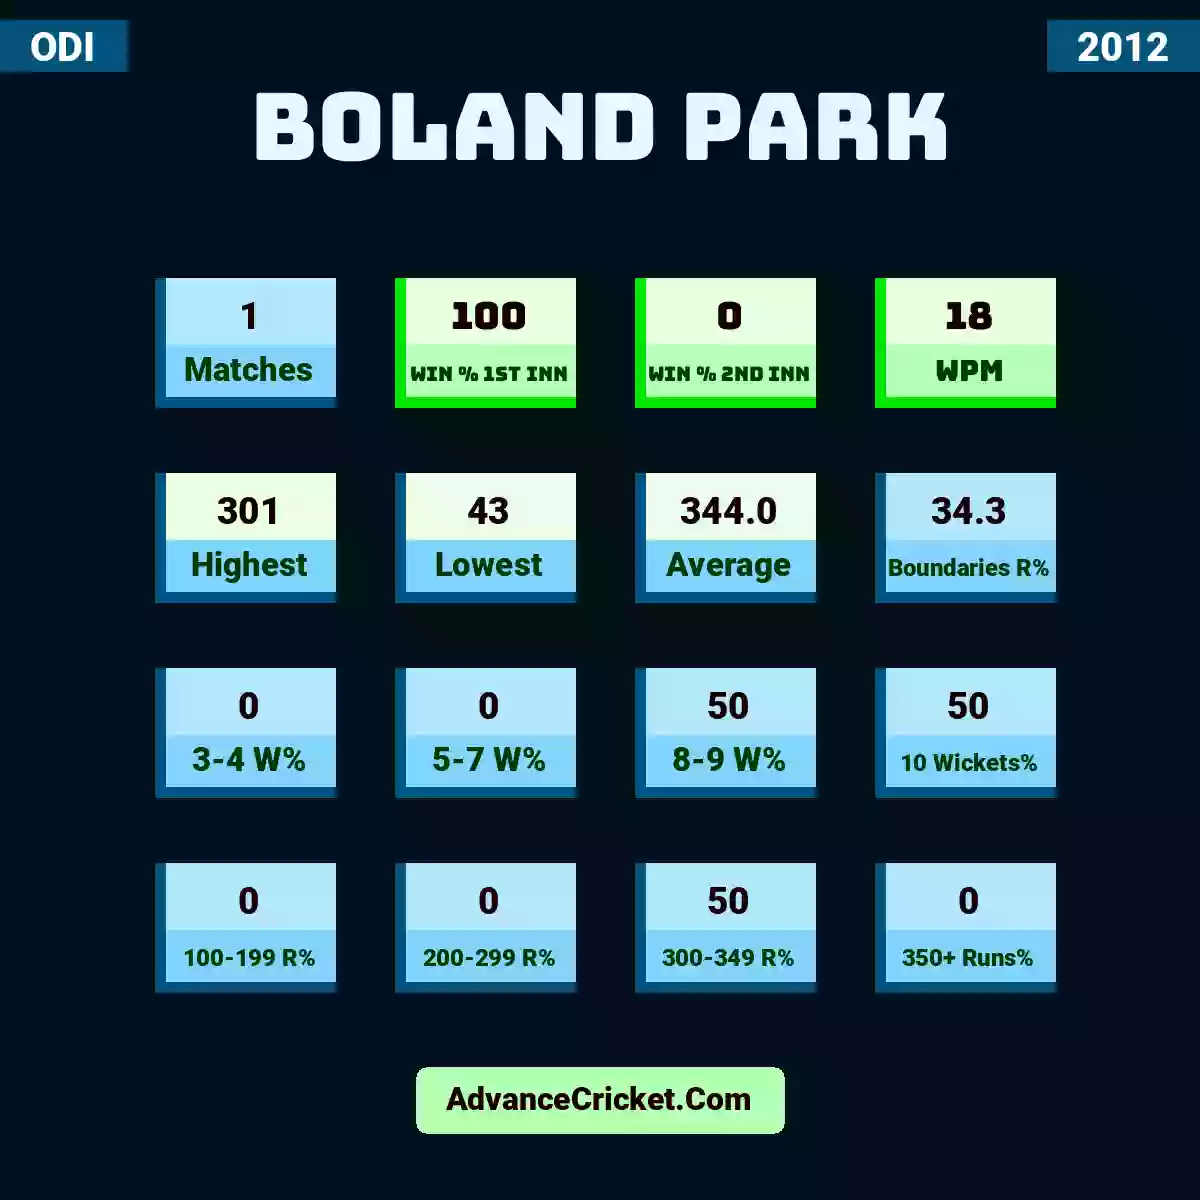 Image showing Boland Park with Matches: 1, Win % 1st Inn: 100, Win % 2nd Inn: 0, WPM: 18, Highest: 301, Lowest: 43, Average: 344.0, Boundaries R%: 34.3, 3-4 W%: 0, 5-7 W%: 0, 8-9 W%: 50, 10 Wickets%: 50, 100-199 R%: 0, 200-299 R%: 0, 300-349 R%: 50, 350+ Runs%: 0.